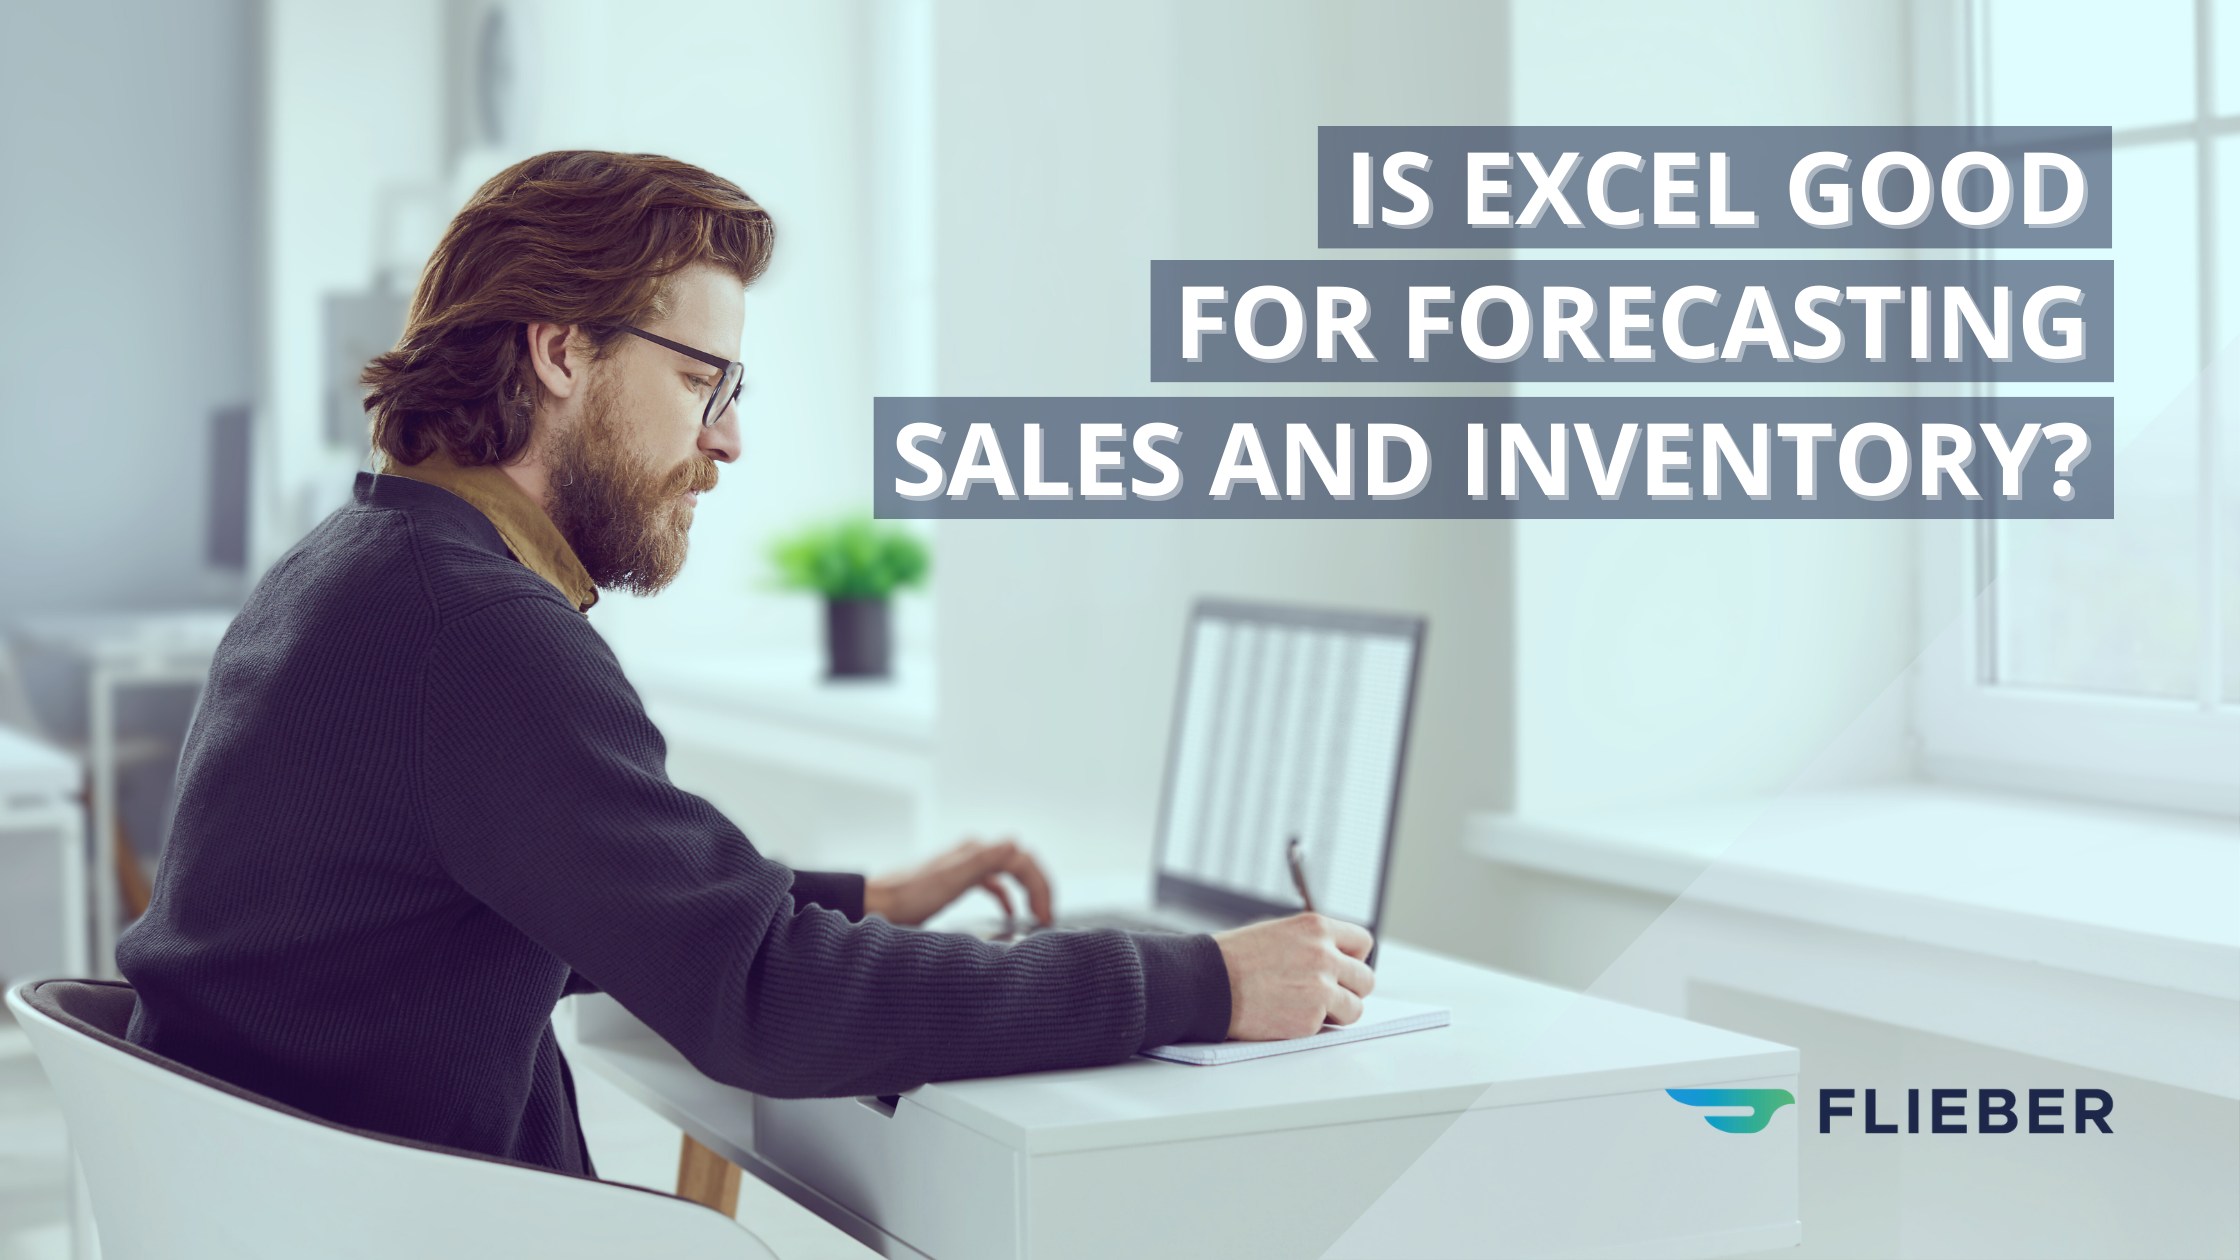 Is Excel Really Good for Forecasting Sales and Inventory?